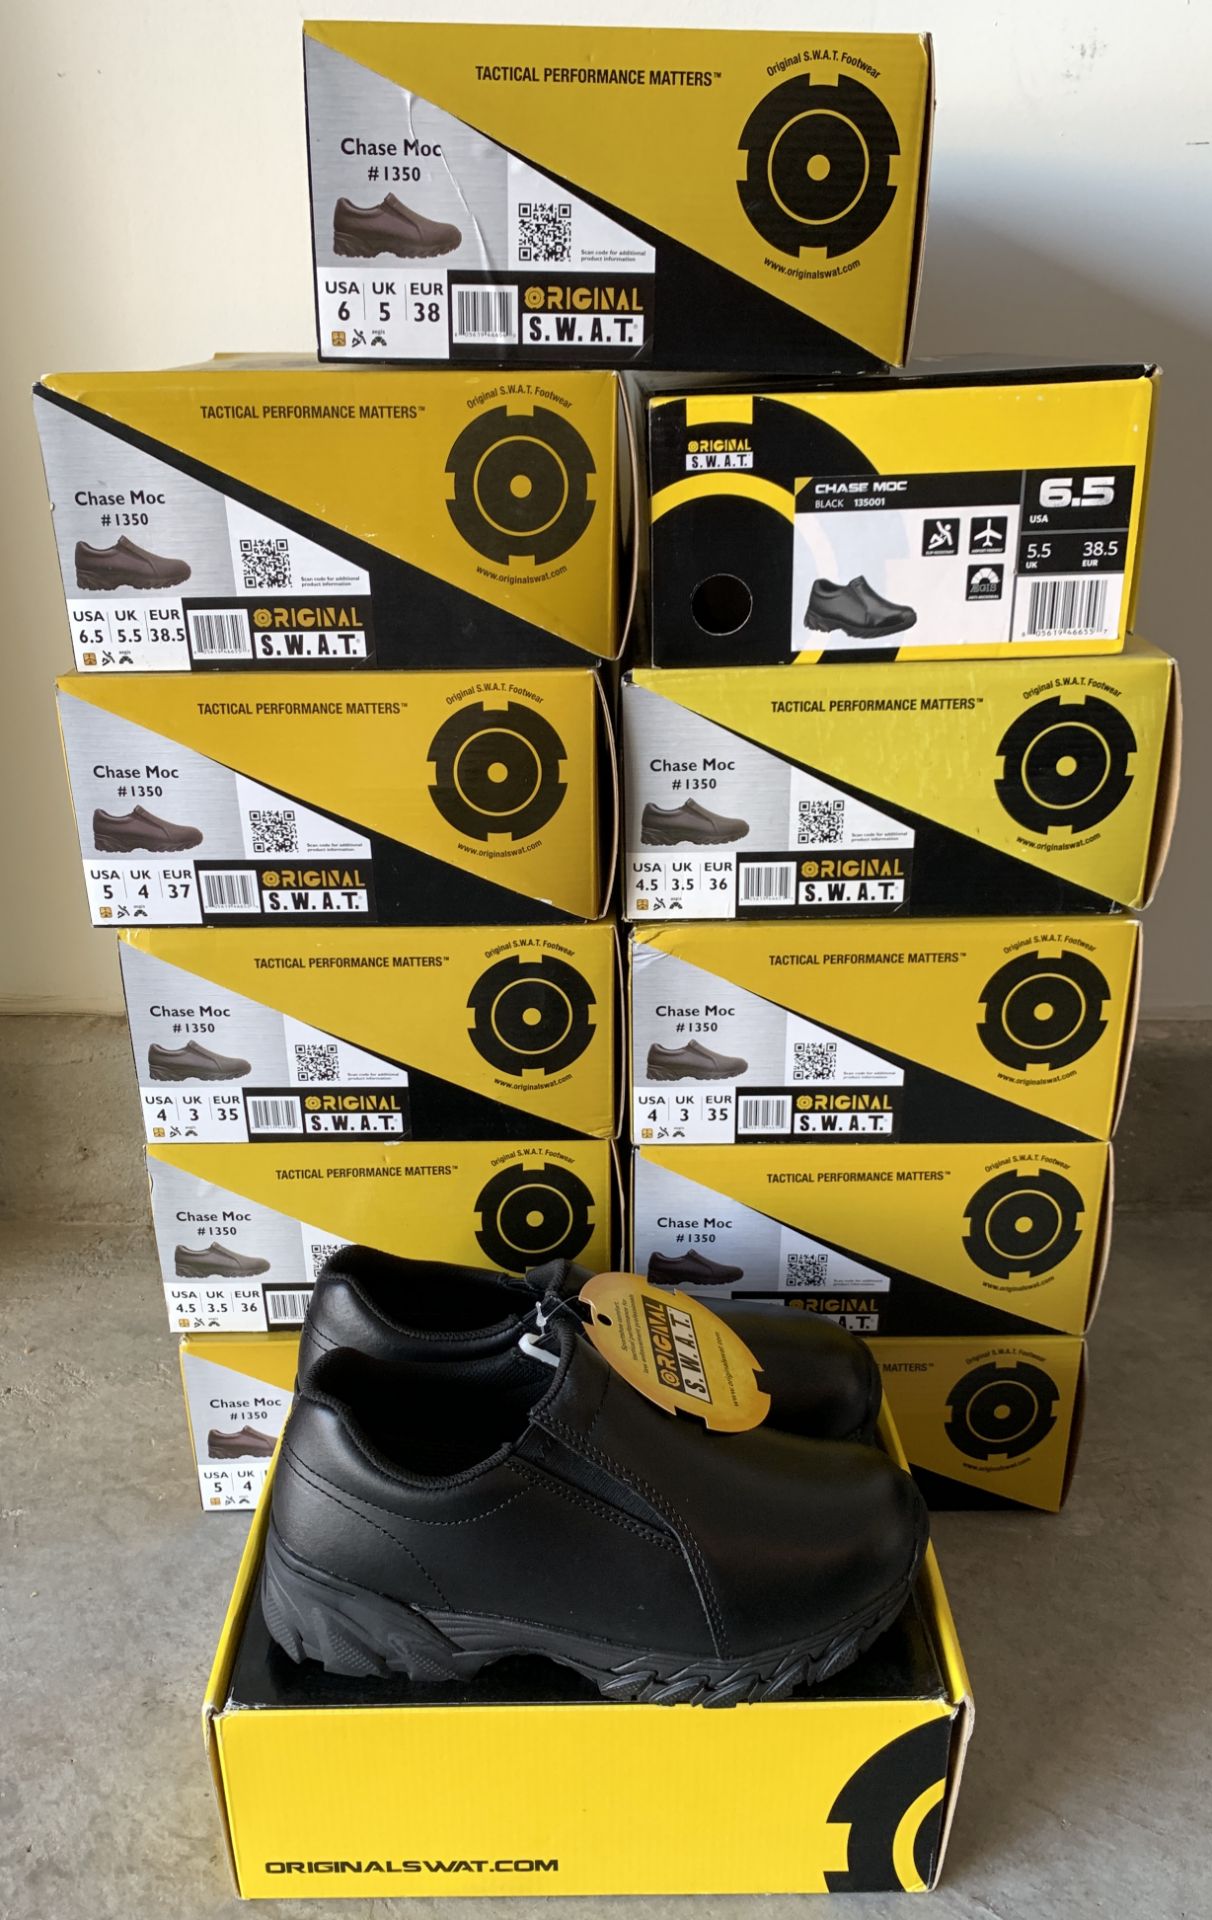 12 Pairs Boys Shoes, Original S.W.A.T Brand, New in Box, Various Sizes, Black